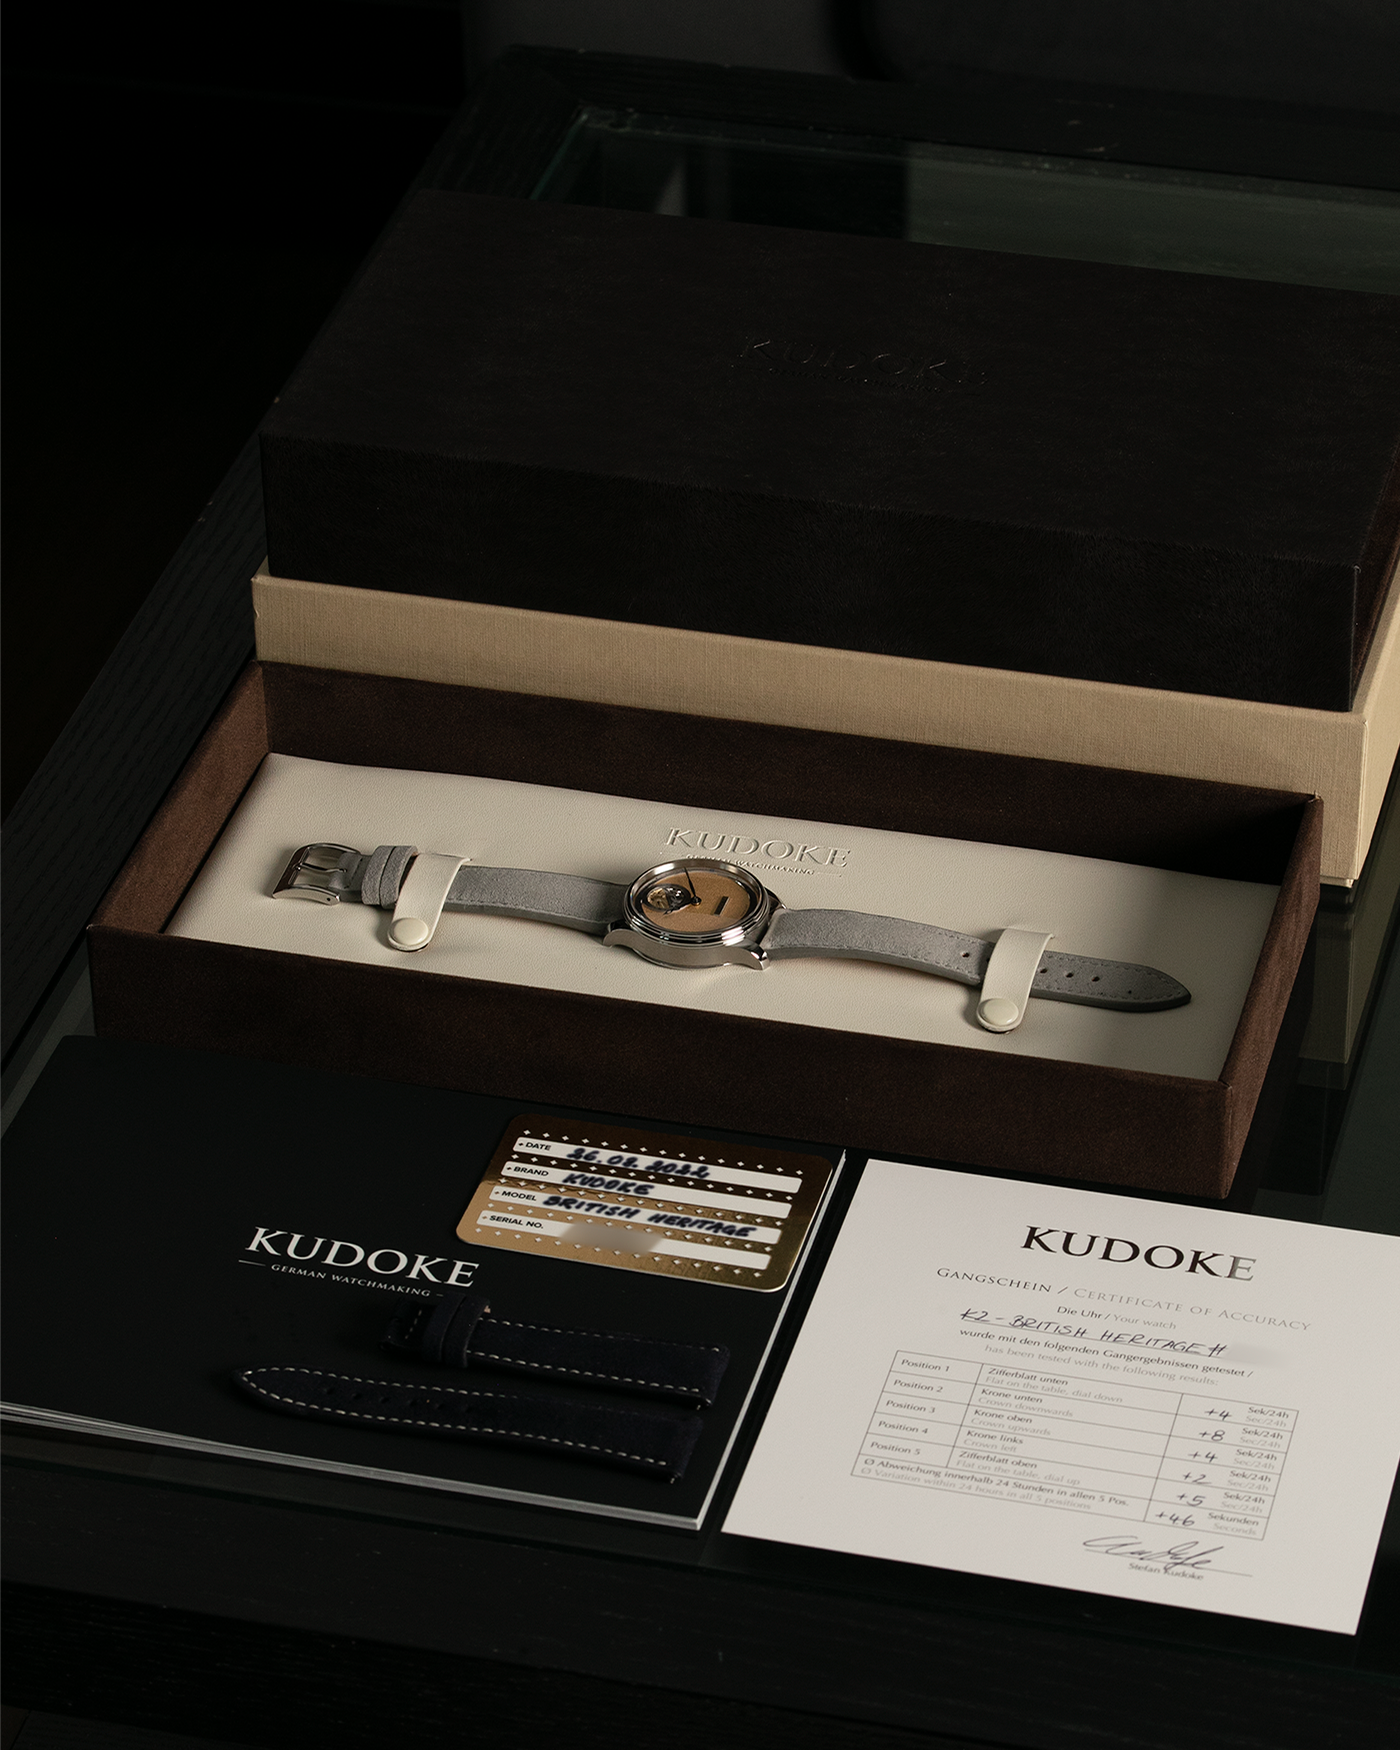 Brand: Kudoke Year: 2022 Model: Kudoke 2 ‘British Heritage’, Limited Edition of 30 pieces Material: Stainless Steel Movement: Kudoke Kaliber 1-24H, Manual-Winding Case Diameter: 39mm Lug Width: 20mm Strap: Kudoke Grey Alcantara Leather Strap with Signed Stainless Steel Tang Buckle, additional Dark Blue Alcantara Leather Strap